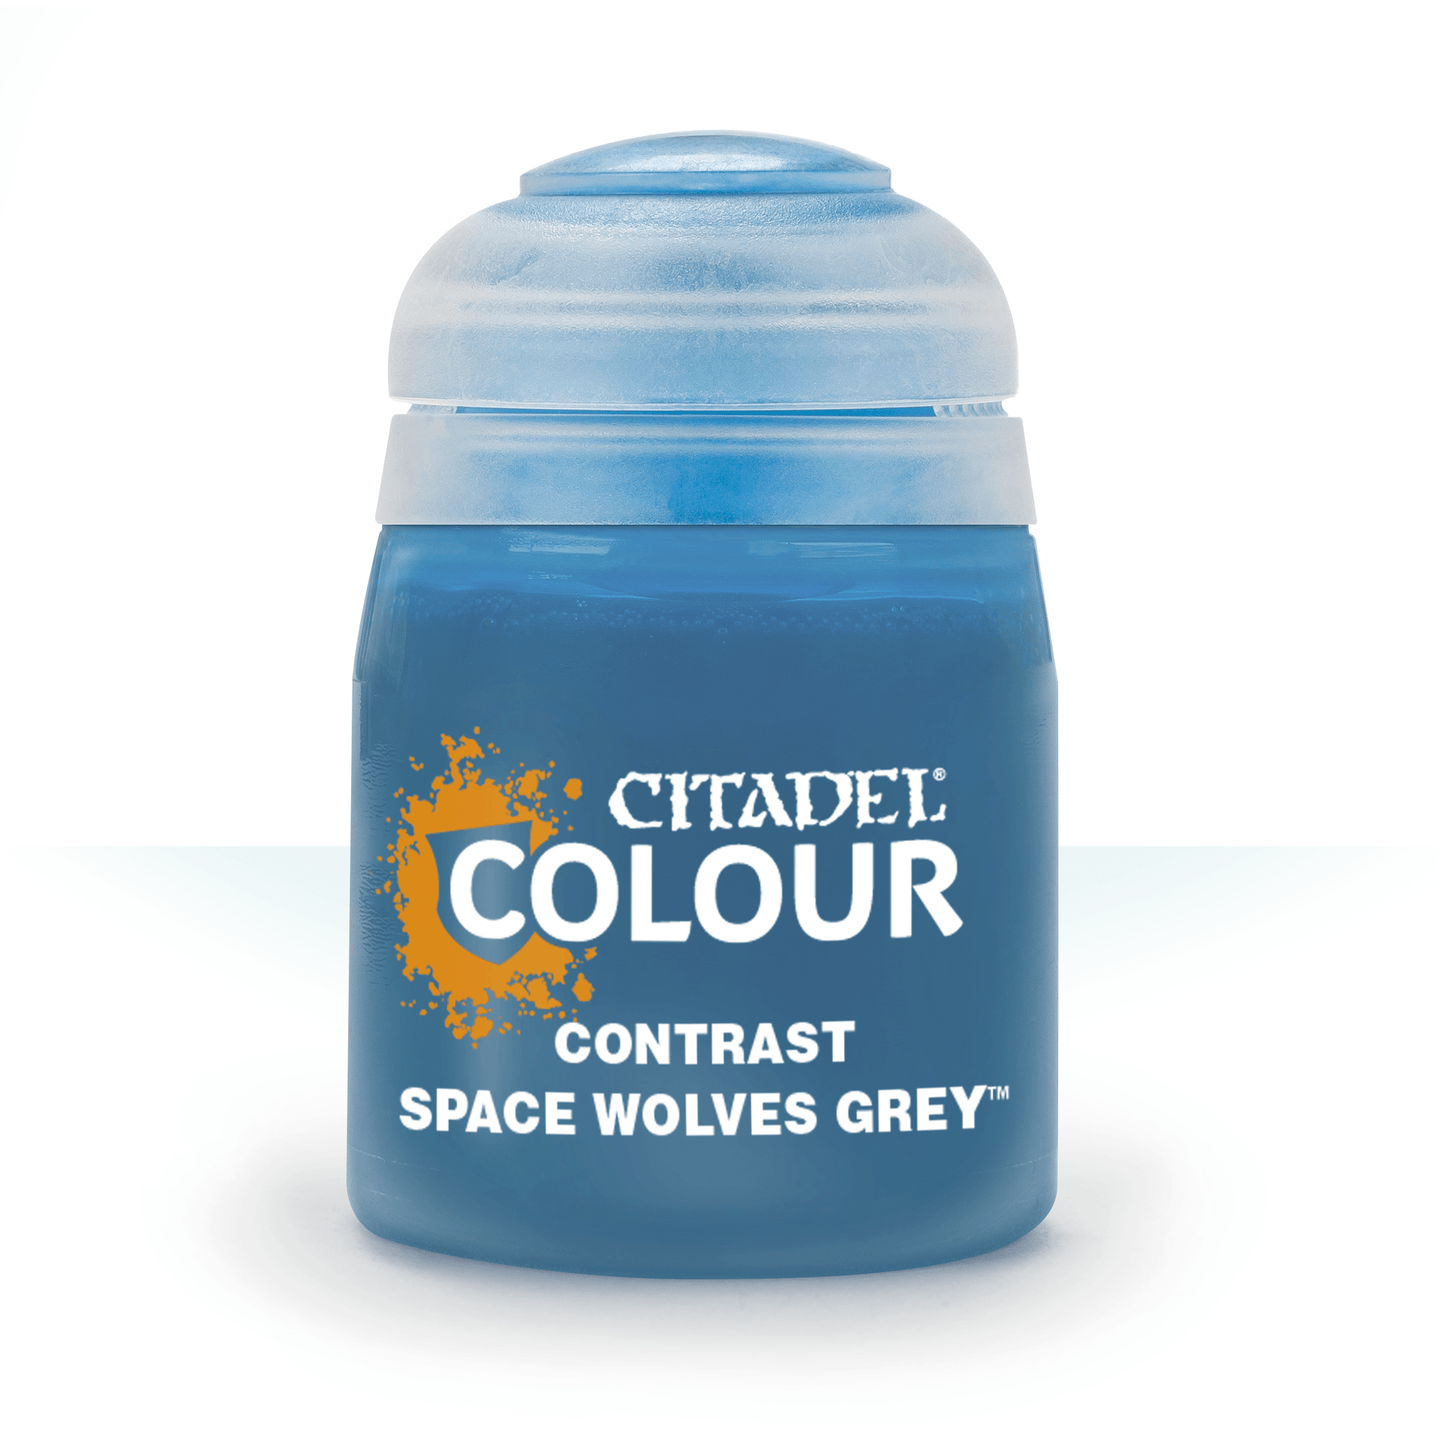 Space Wolves Grey - Contrast